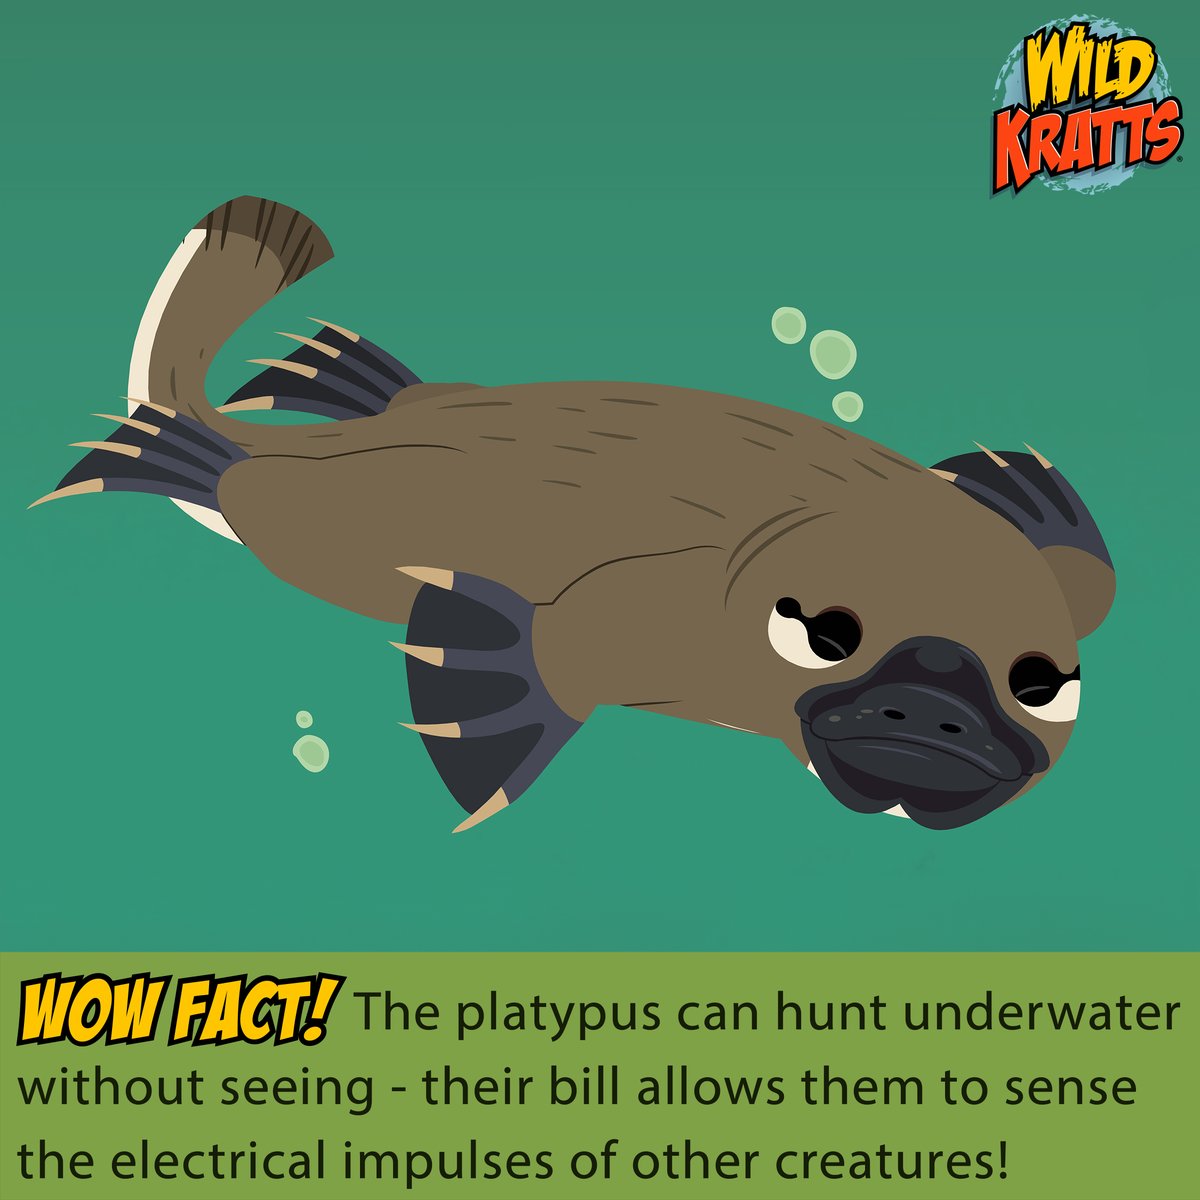 This week's WOW Fact is all about one of nature's most bizarre and versatile creatures: the platypus! 🌊🐾 Imagine a creature that lays eggs like a bird, packs venom like a reptile, and hunts underwater using electroreception like a fish. That's the platypus! Male platypuses